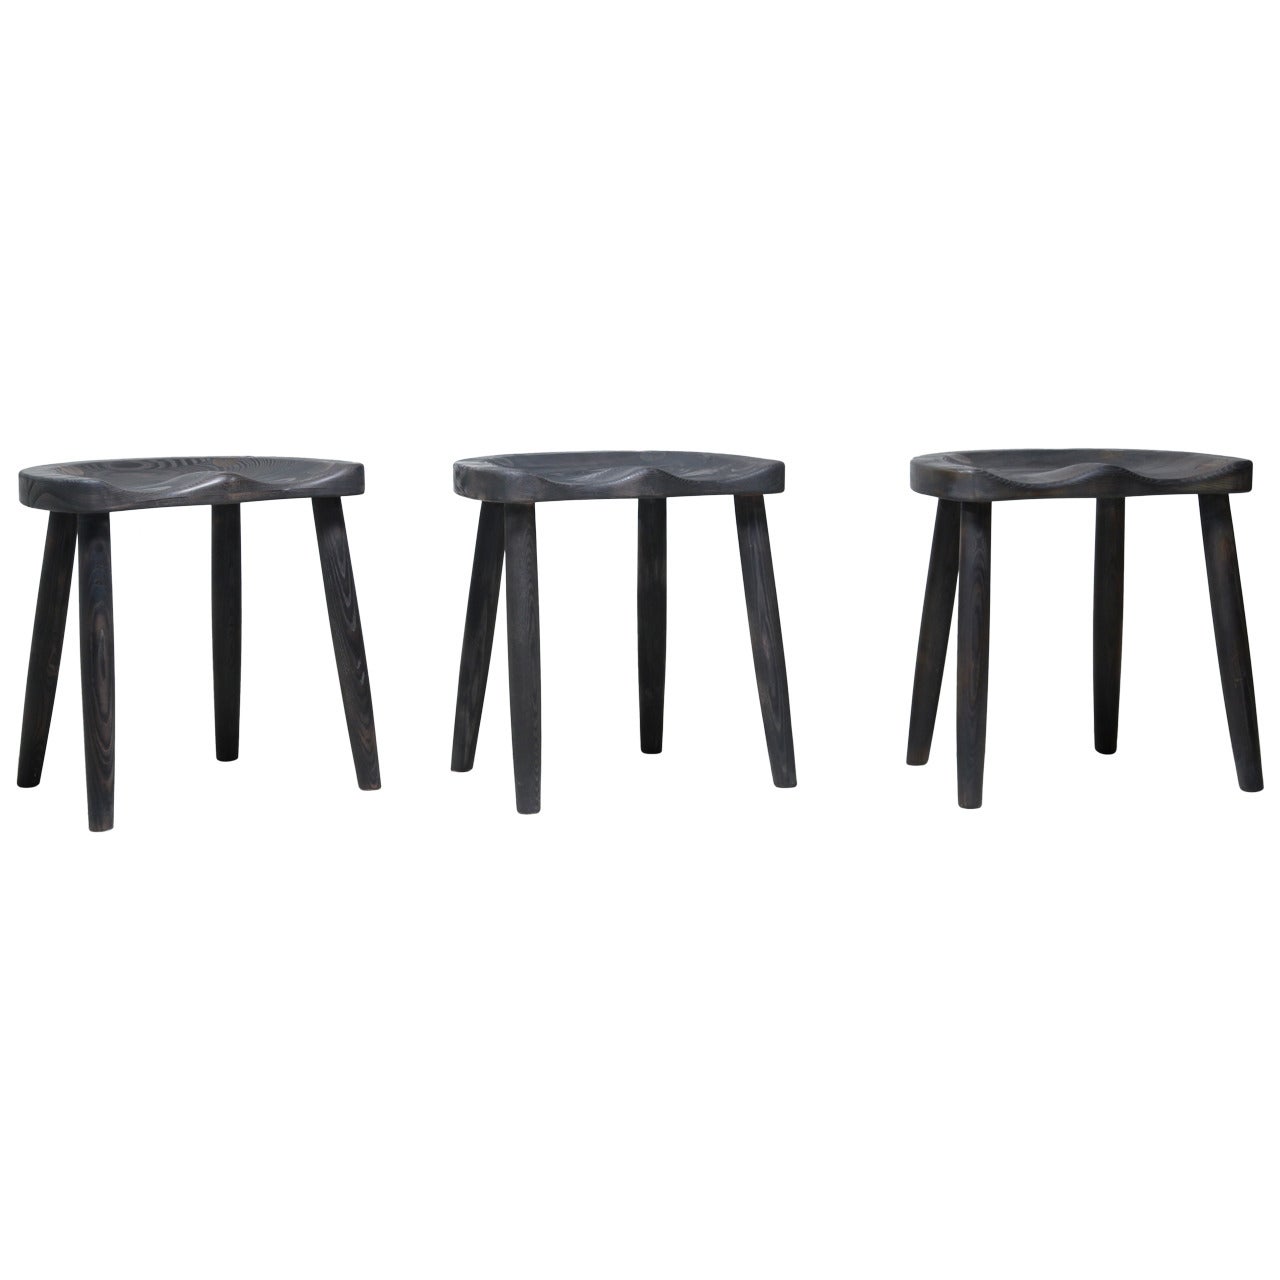 Studio Stools in Blackened Wood by Robert Roakes, USA, 1970s For Sale